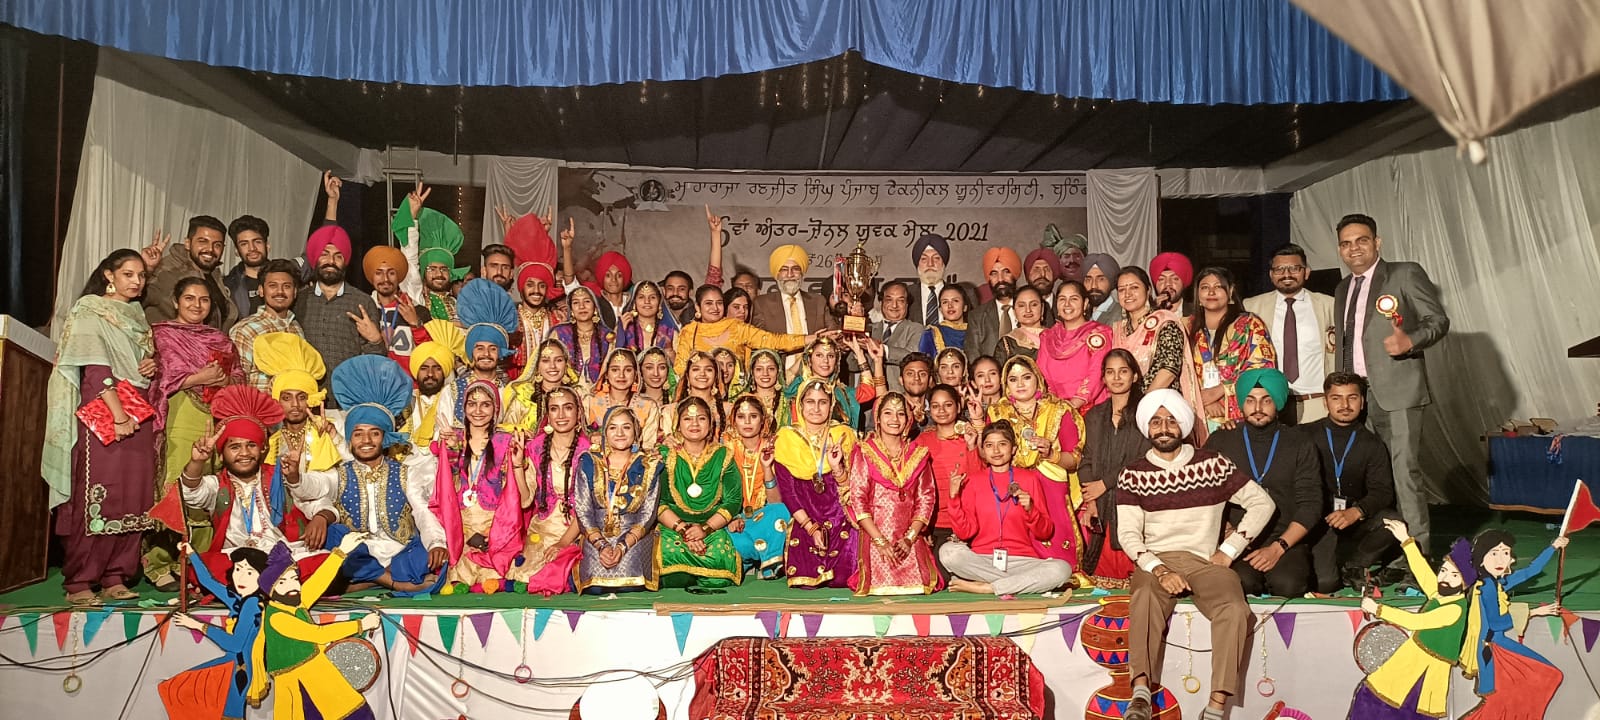 MRSPTU’s Inter Zonal Youth Festival "Maan Watna Da” concluded- GZSCCET is overall champ